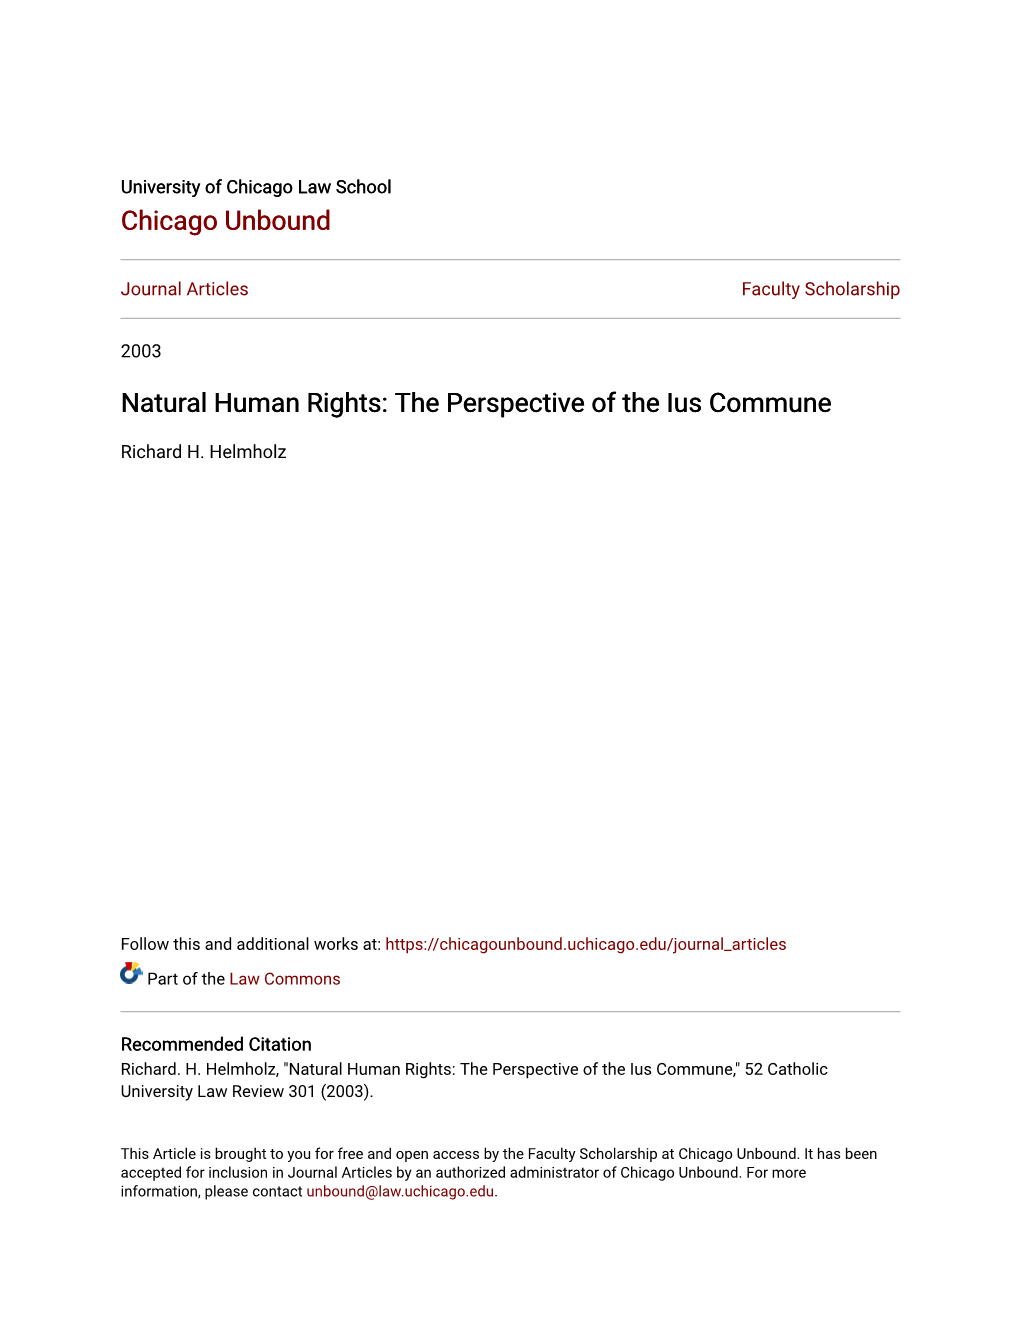 Natural Human Rights: the Perspective of the Ius Commune